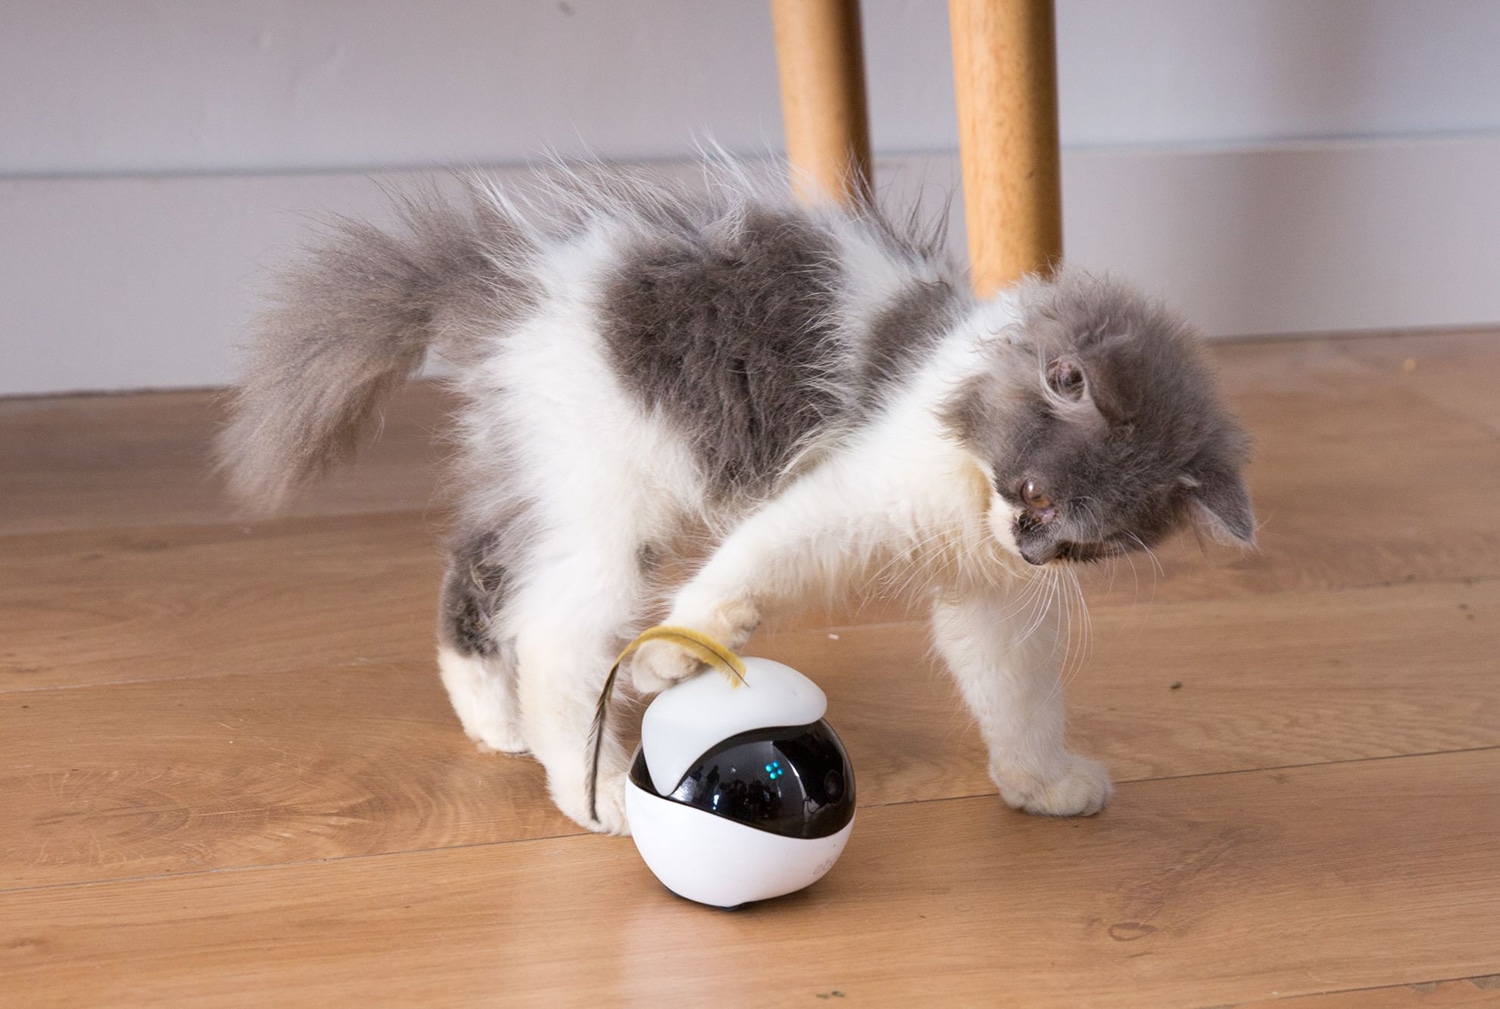 Ebo, The Smart Robot Companion for Your Cat